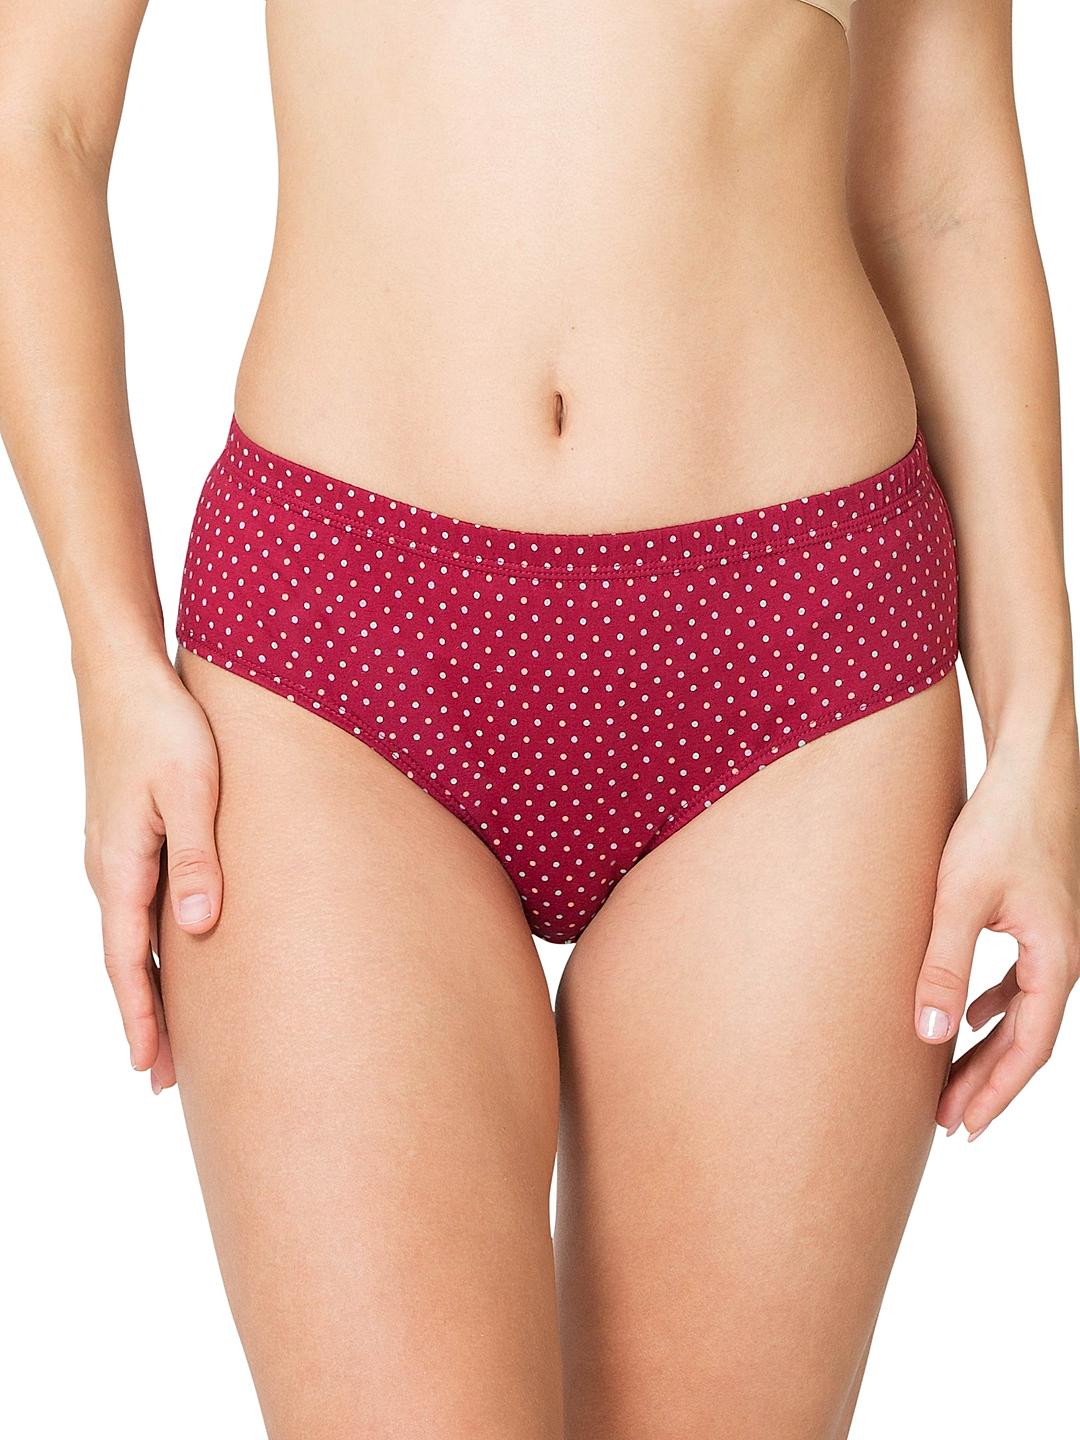 Stretchable Outer Elastic Hipster Panty